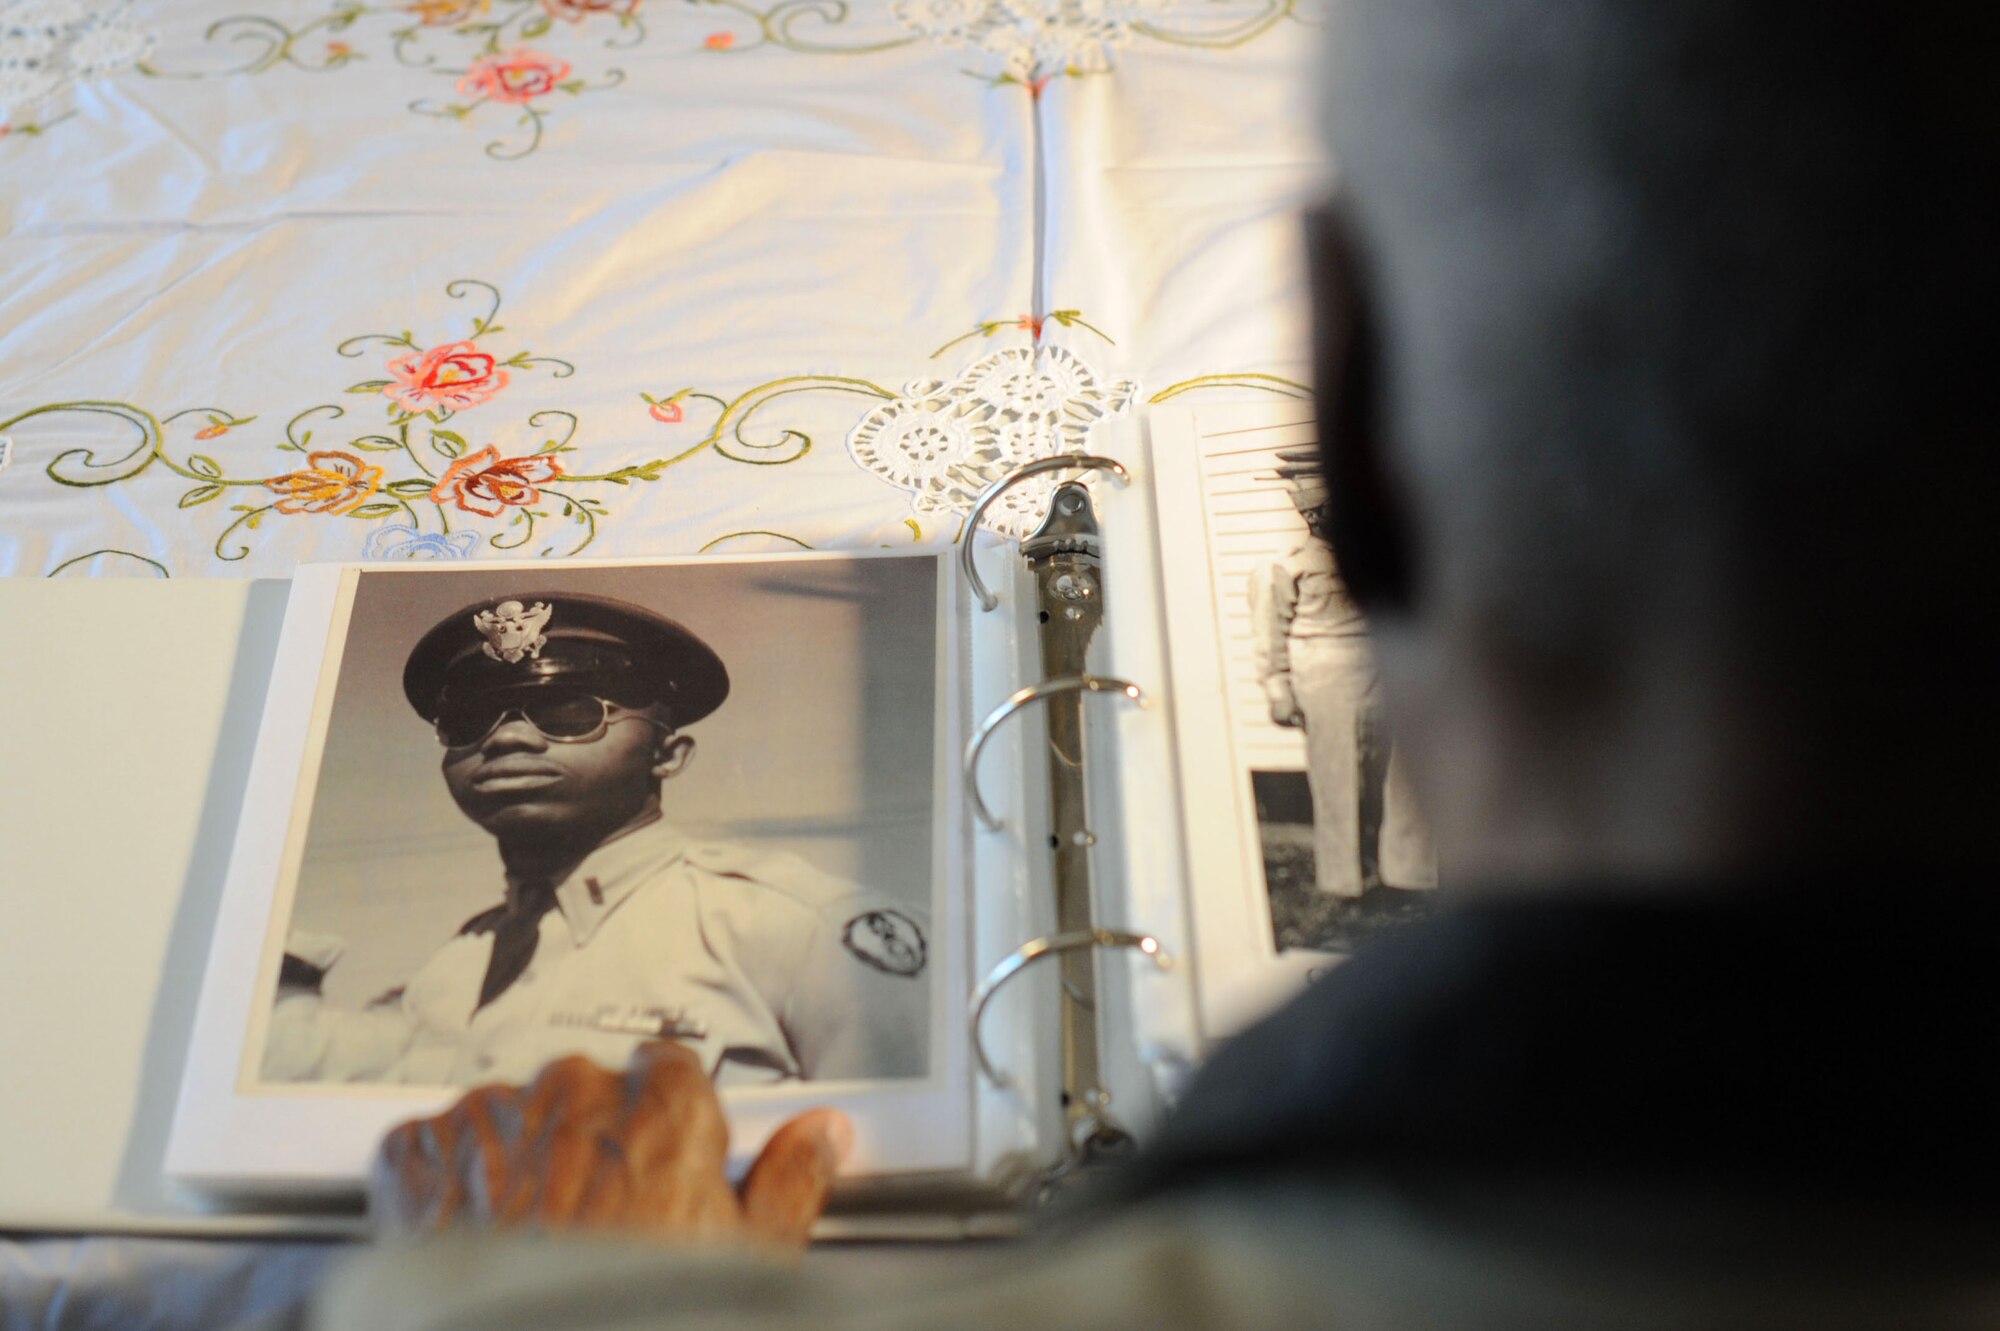 Retired Maj. George Boyd, looks at a photo of himself in service dress when he was younger, Feb. 25, 2016, at his home in Wichita, Kan. Boyd served for nearly three decades as both an enlisted Airman and a commissioned officer and is currently a colonel in the U.S. Civil Air Patrol. (U.S. Air Force photo/Airman 1st Class Christopher Thornbury)  